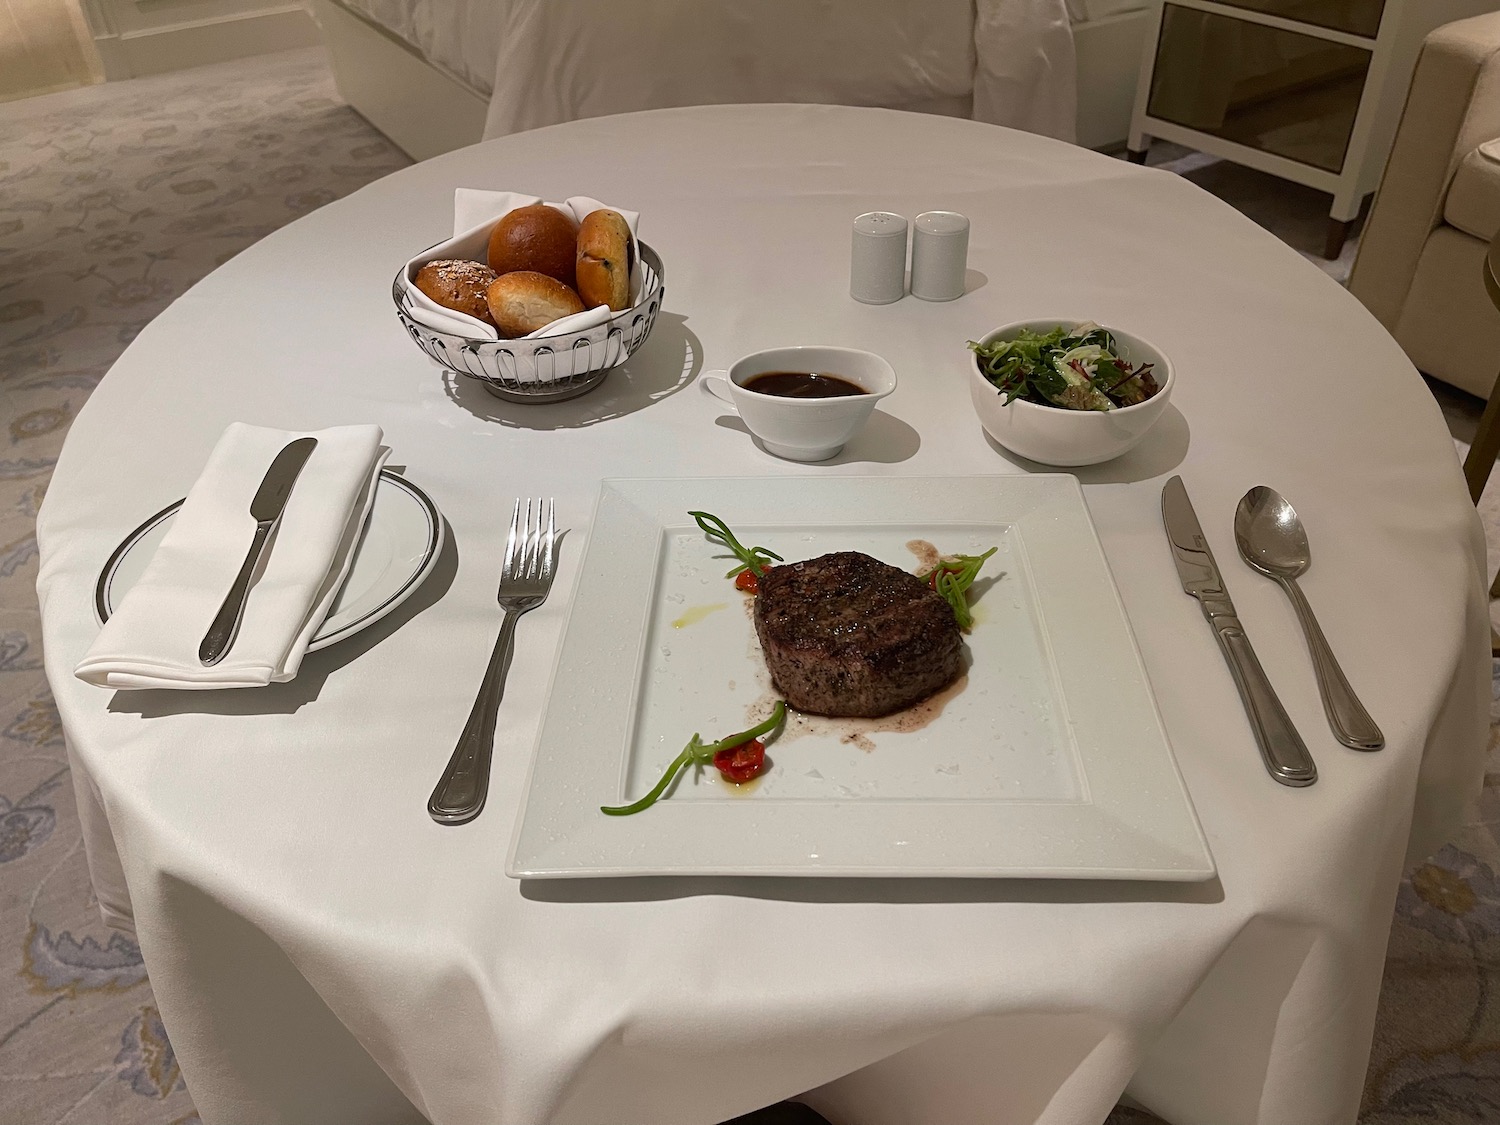 a plate of steak and salad on a table